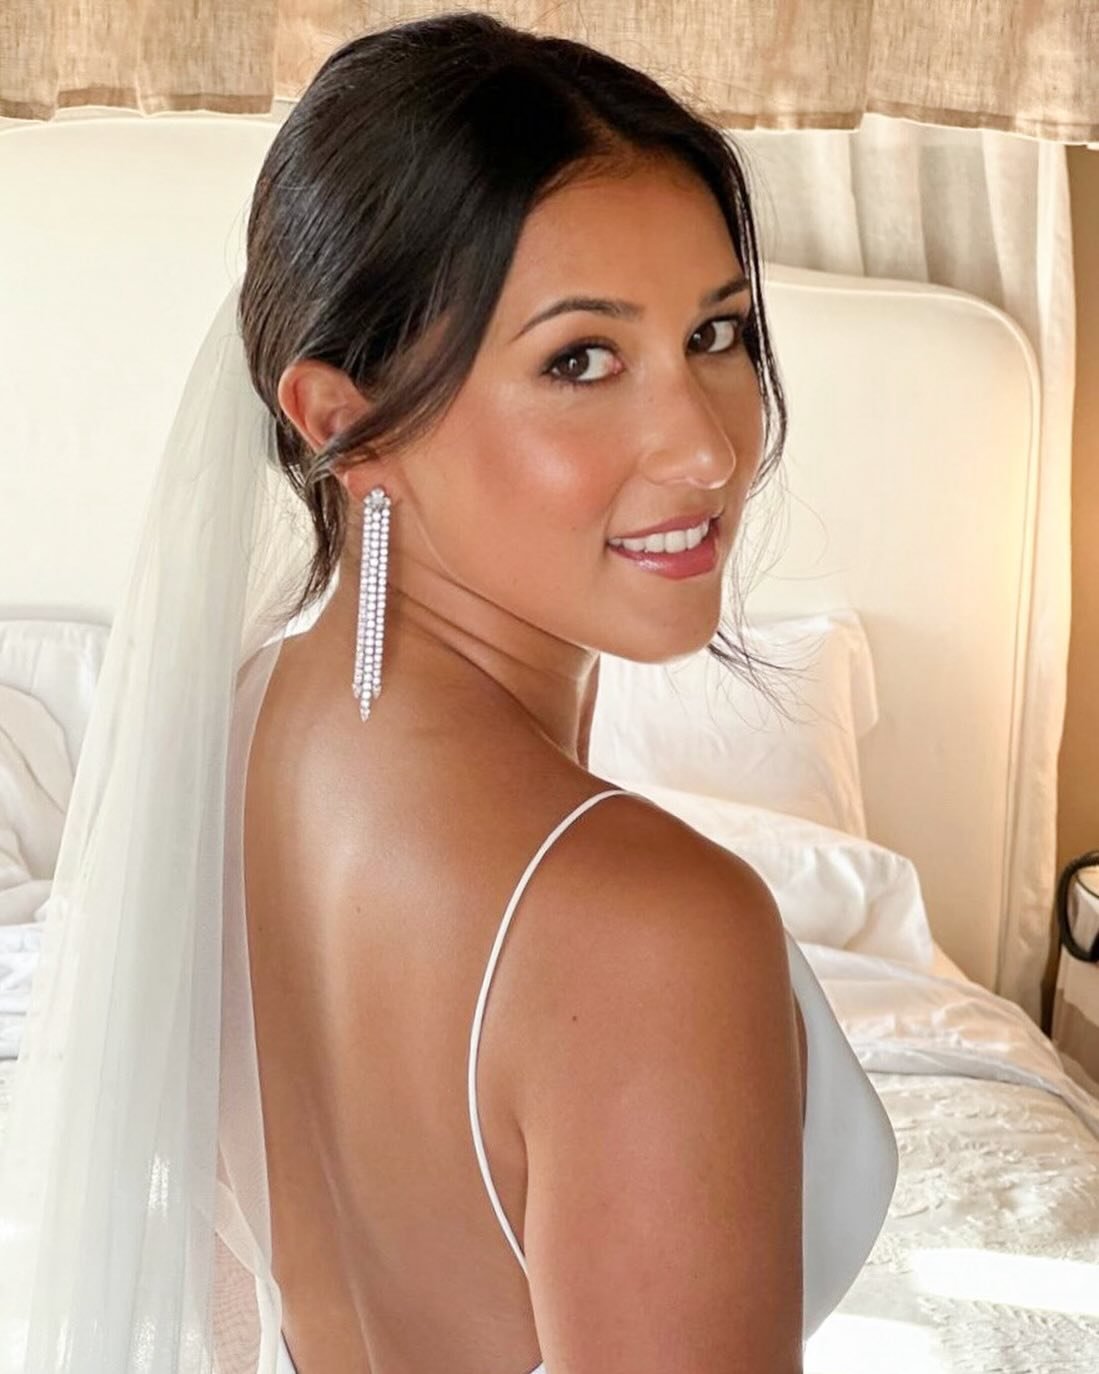 &ldquo;Samantha and her team were amazing! She did a wonderful job getting my girls and me ready for the big wedding day. She took into account everybody&rsquo;s special wishes and made everyone look just amazing. We also loved the products that she 